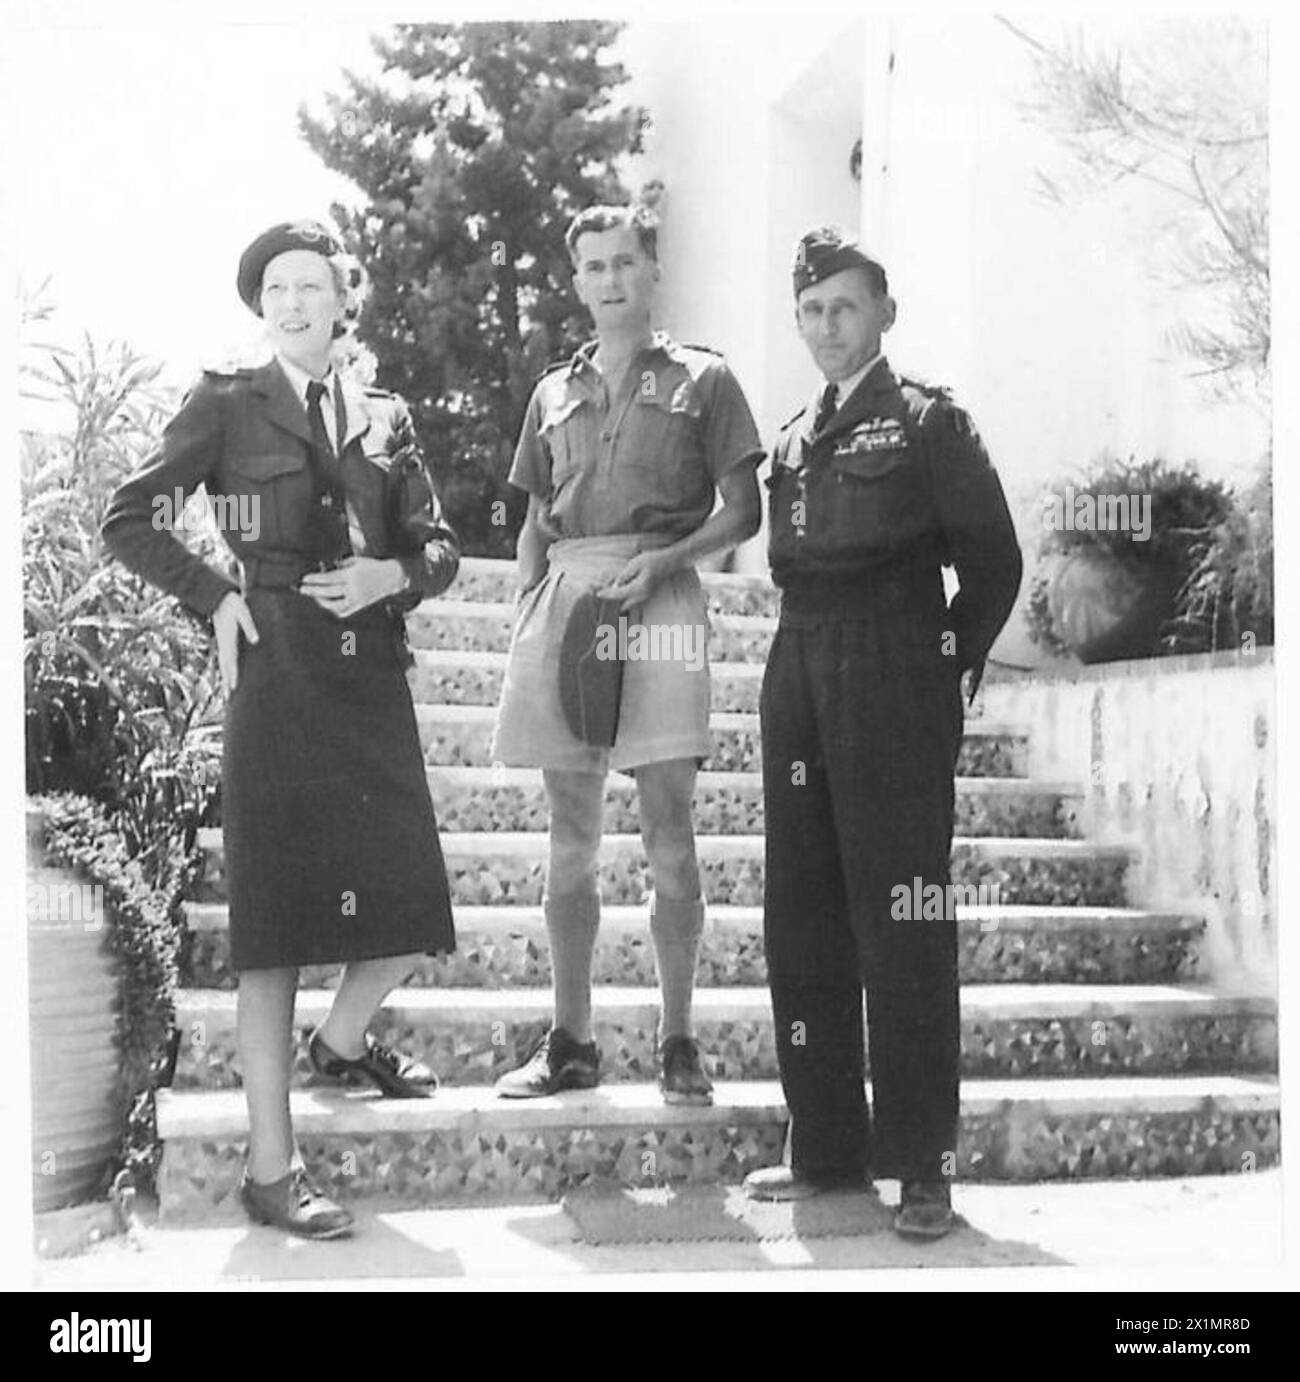 AIR CHIEF MARSHAL TEDDER VISITS ATHENS - Air Chief Marshal Tedder and his wife pose for a photograph on the steps of the A.O.C's house outside Athens. Air Commodore Tuttle is in the centre, British Army Stock Photo